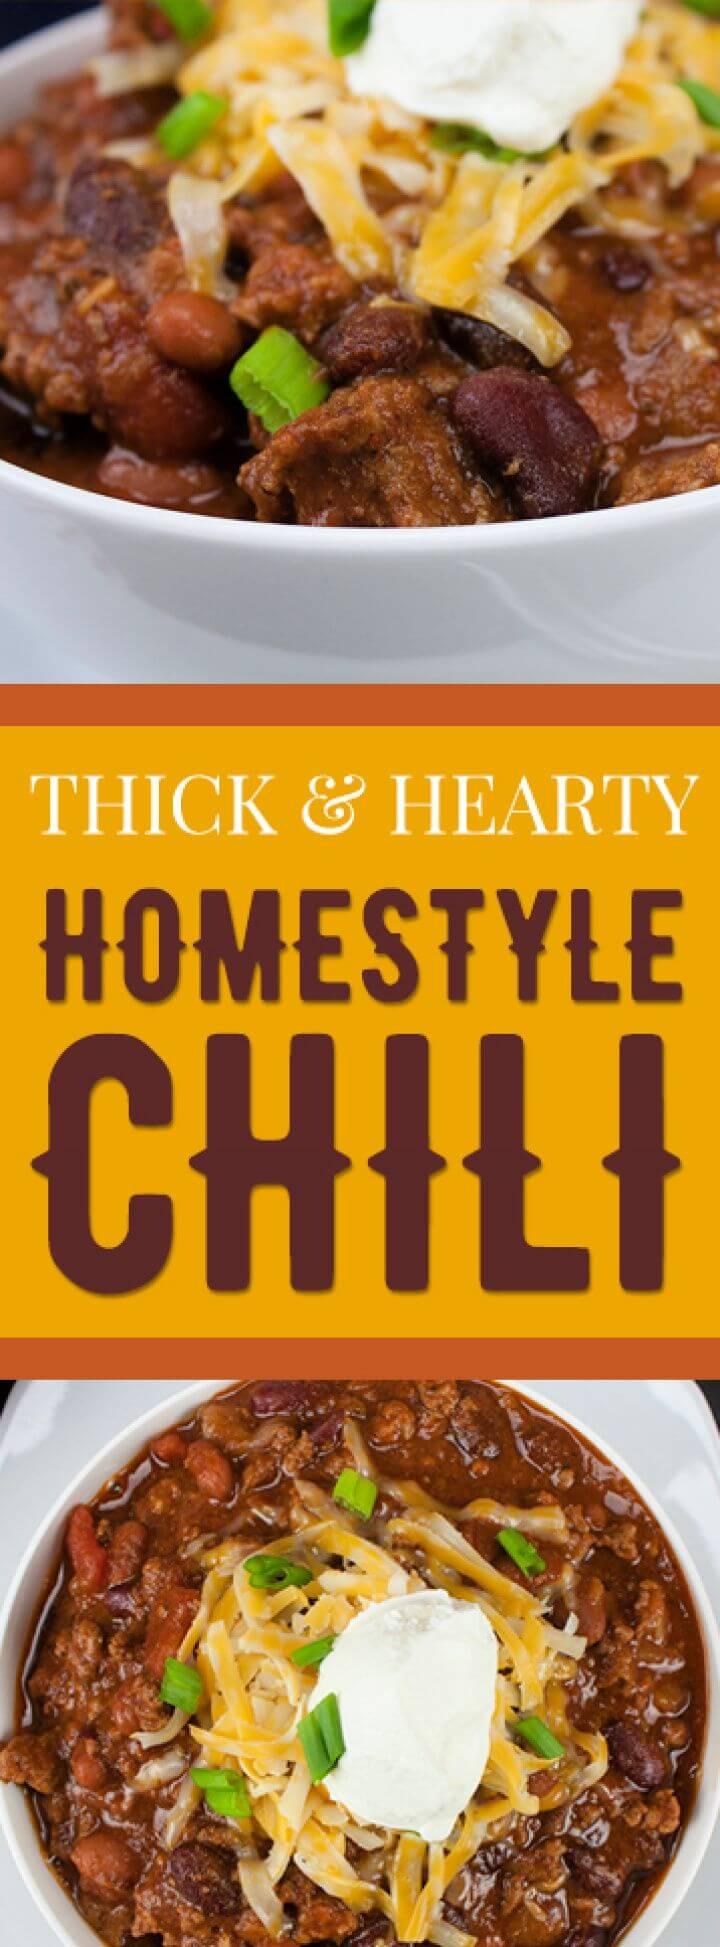 How To DIY Thick and Hearty Homestyle Chili